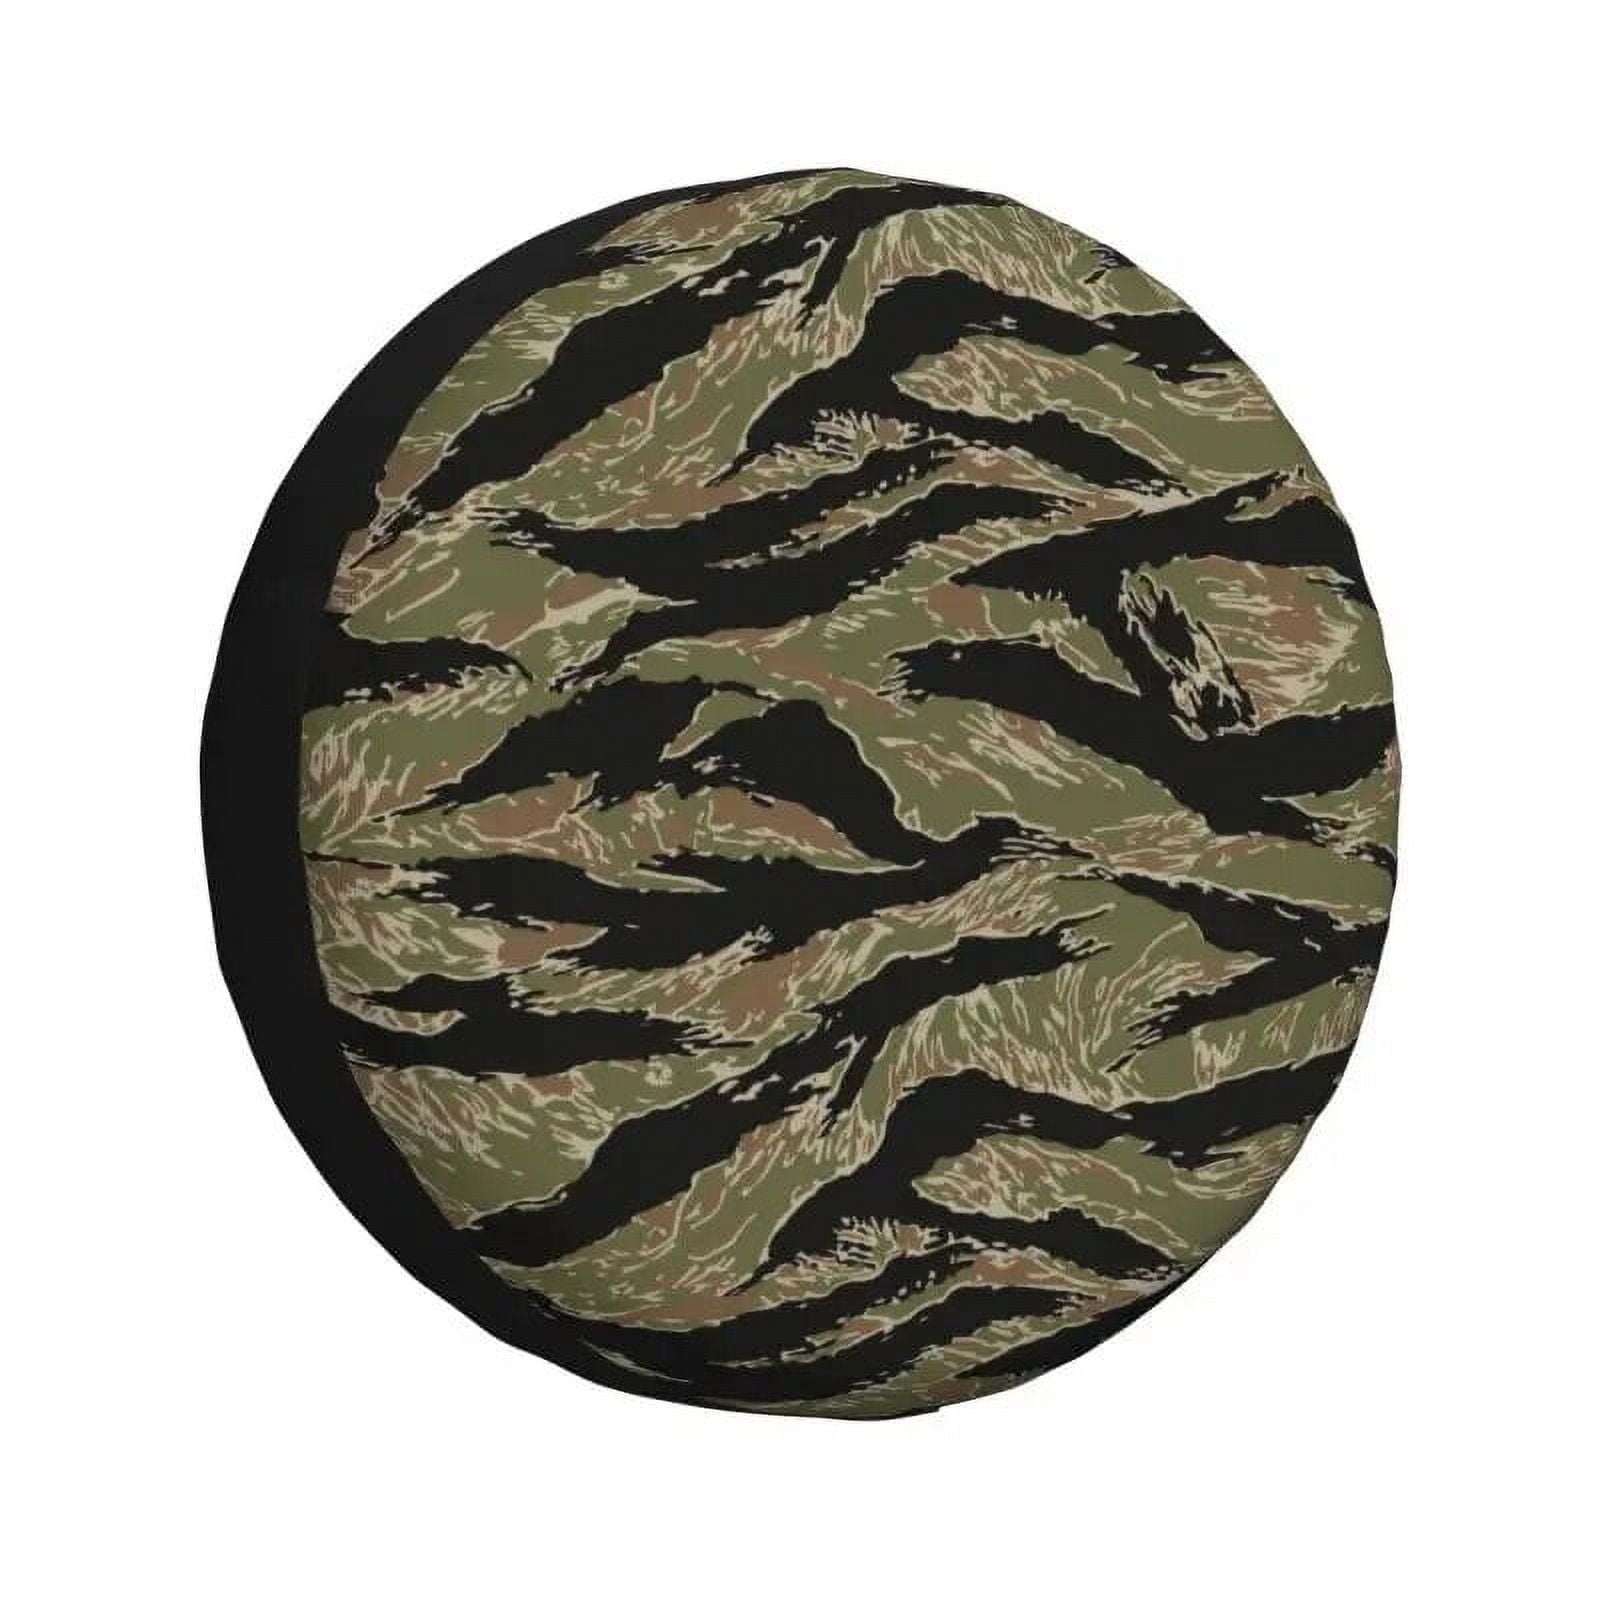 Pea Dot Military Camo Spare Tire Cover for Hummer Army Tactical ...